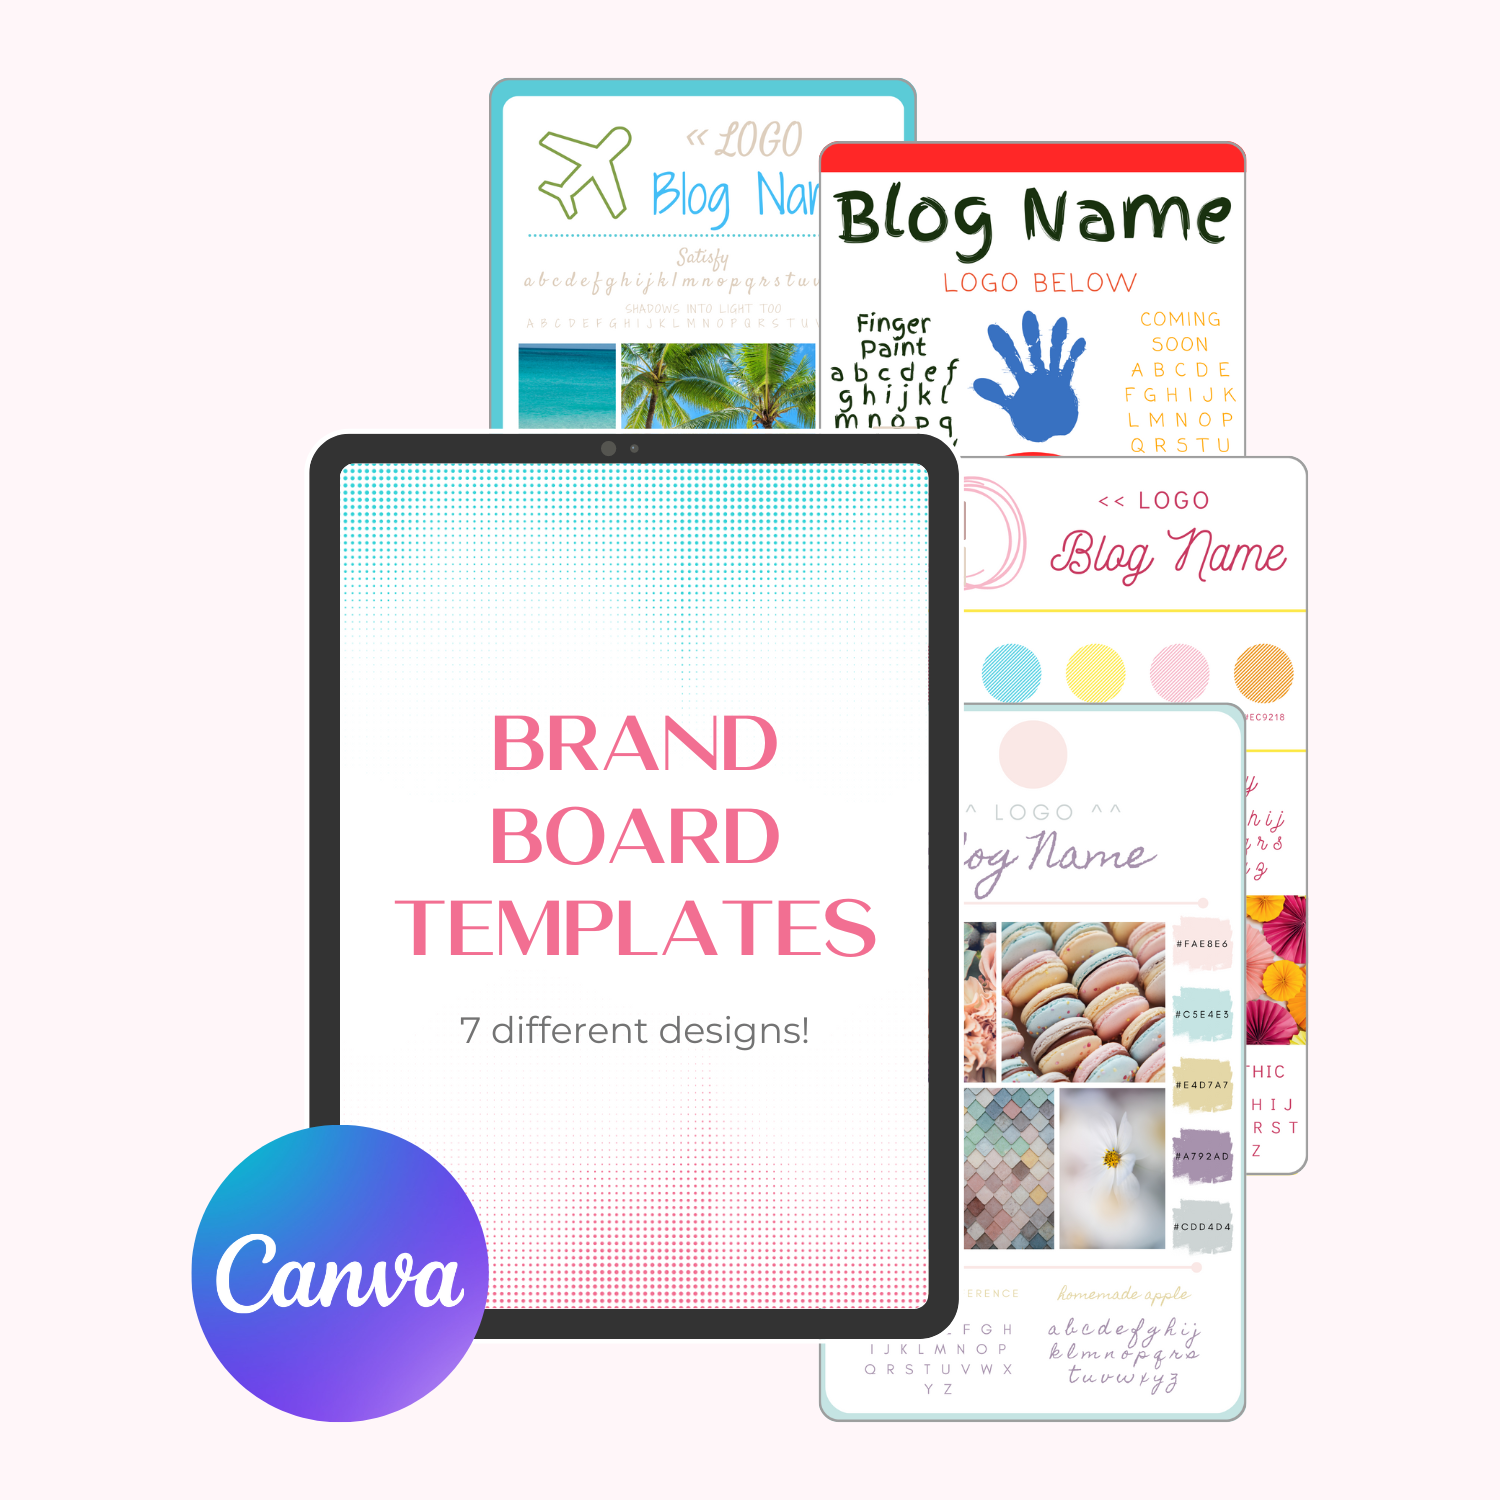 A tablet and graphic mockup displaying the Brand Board Canva Templates templates.